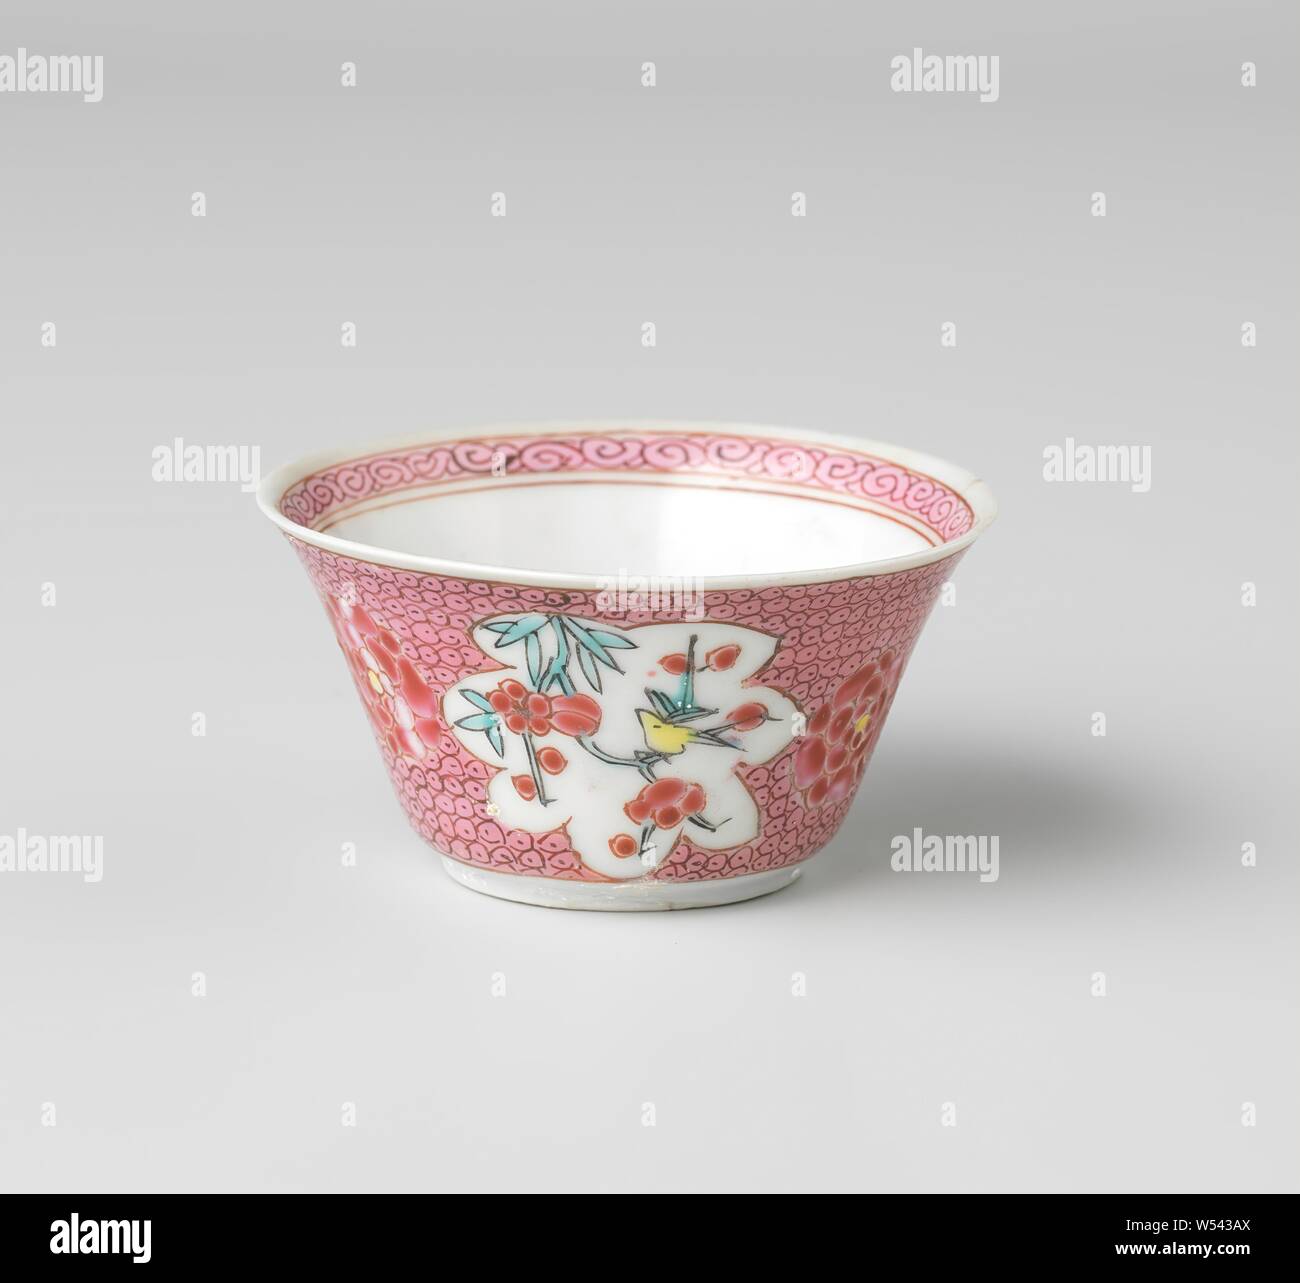 Cup with a Chinese lady and boy in a landscape and flower sprays on diaper pattern, Porcelain cup with a spreading wall painted on the glaze in blue, red, pink, green, yellow and black. On the bottom a medallion with a Chinese lady and a boy in a landscape with trees and rocks, on the wall napkin with three flowers and three cartouches with a bird or insect on a flower branch (prunus, peony, lotus), the inner edge with a curled band. A crack in the wall of the head. Famille rose., anonymous, China, c. 1725 - c. 1749, Qing-dynasty (1644-1912) / Yongzheng-period (1723-1735) / Qianlong-period Stock Photo